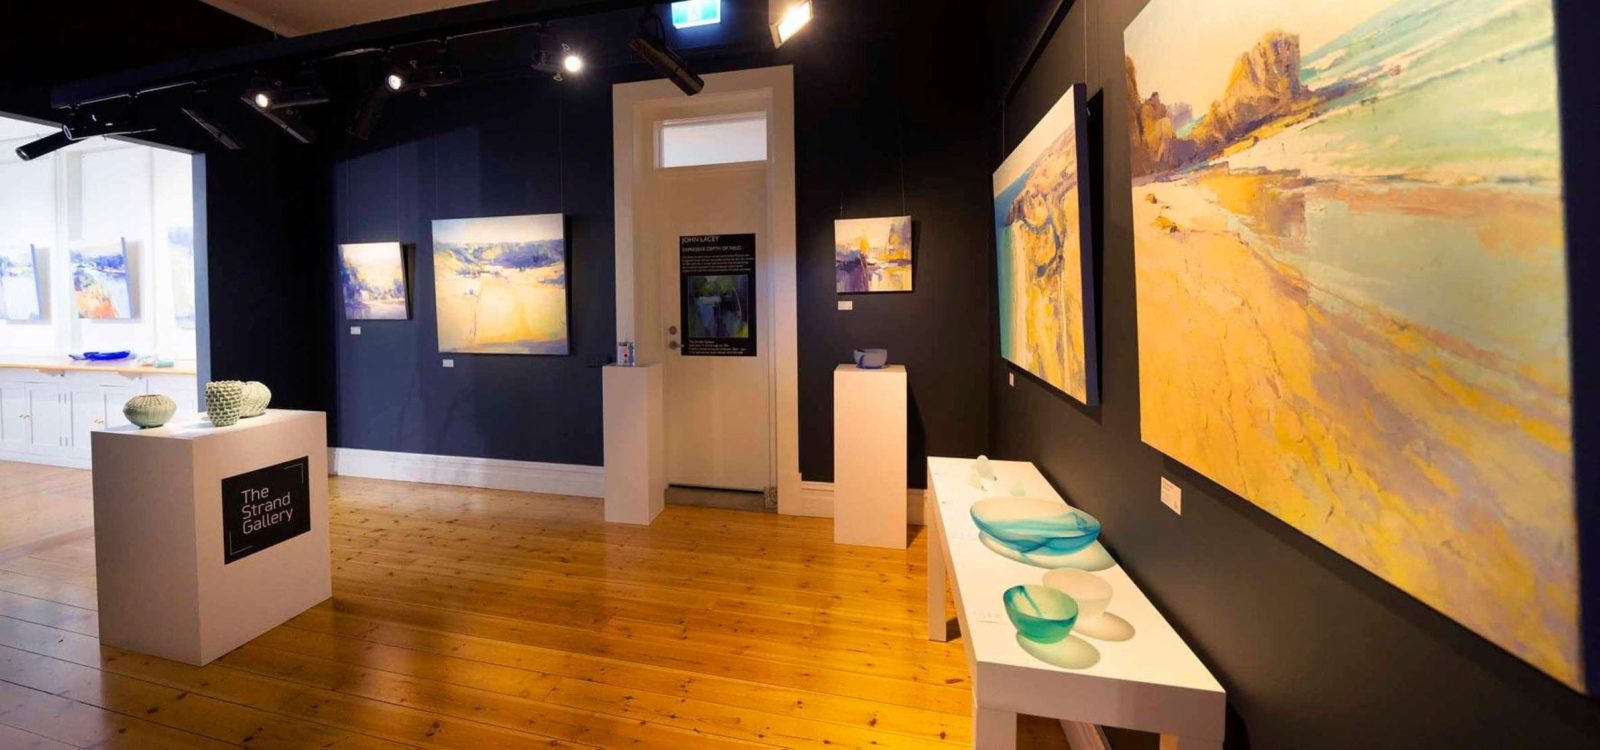 gallery interior showing dark painted walls and artwork hanging